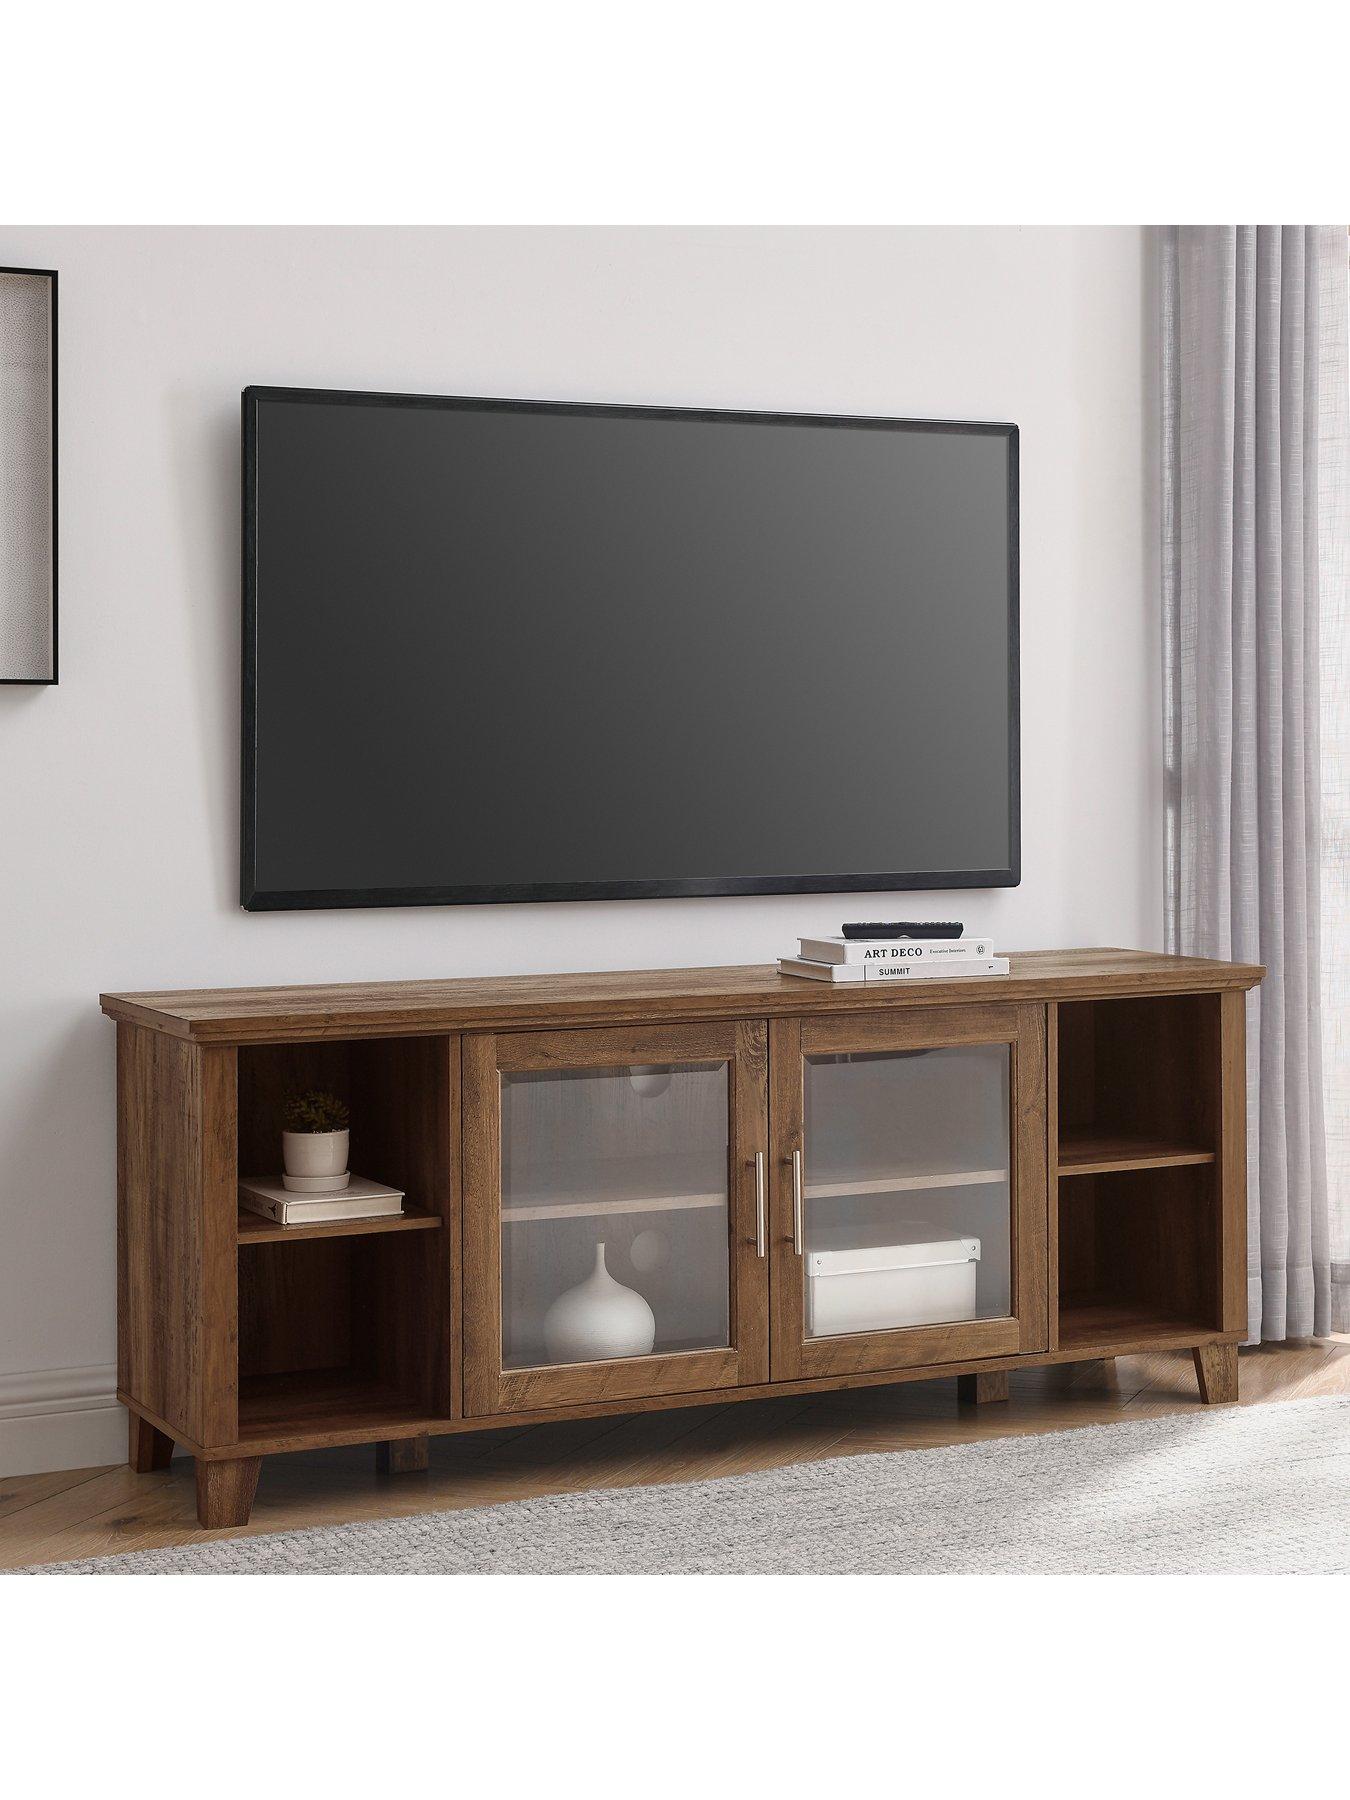 Details about   40" TV Stand Entertainment Center Media Console Wood Storage Furniture Gray New 